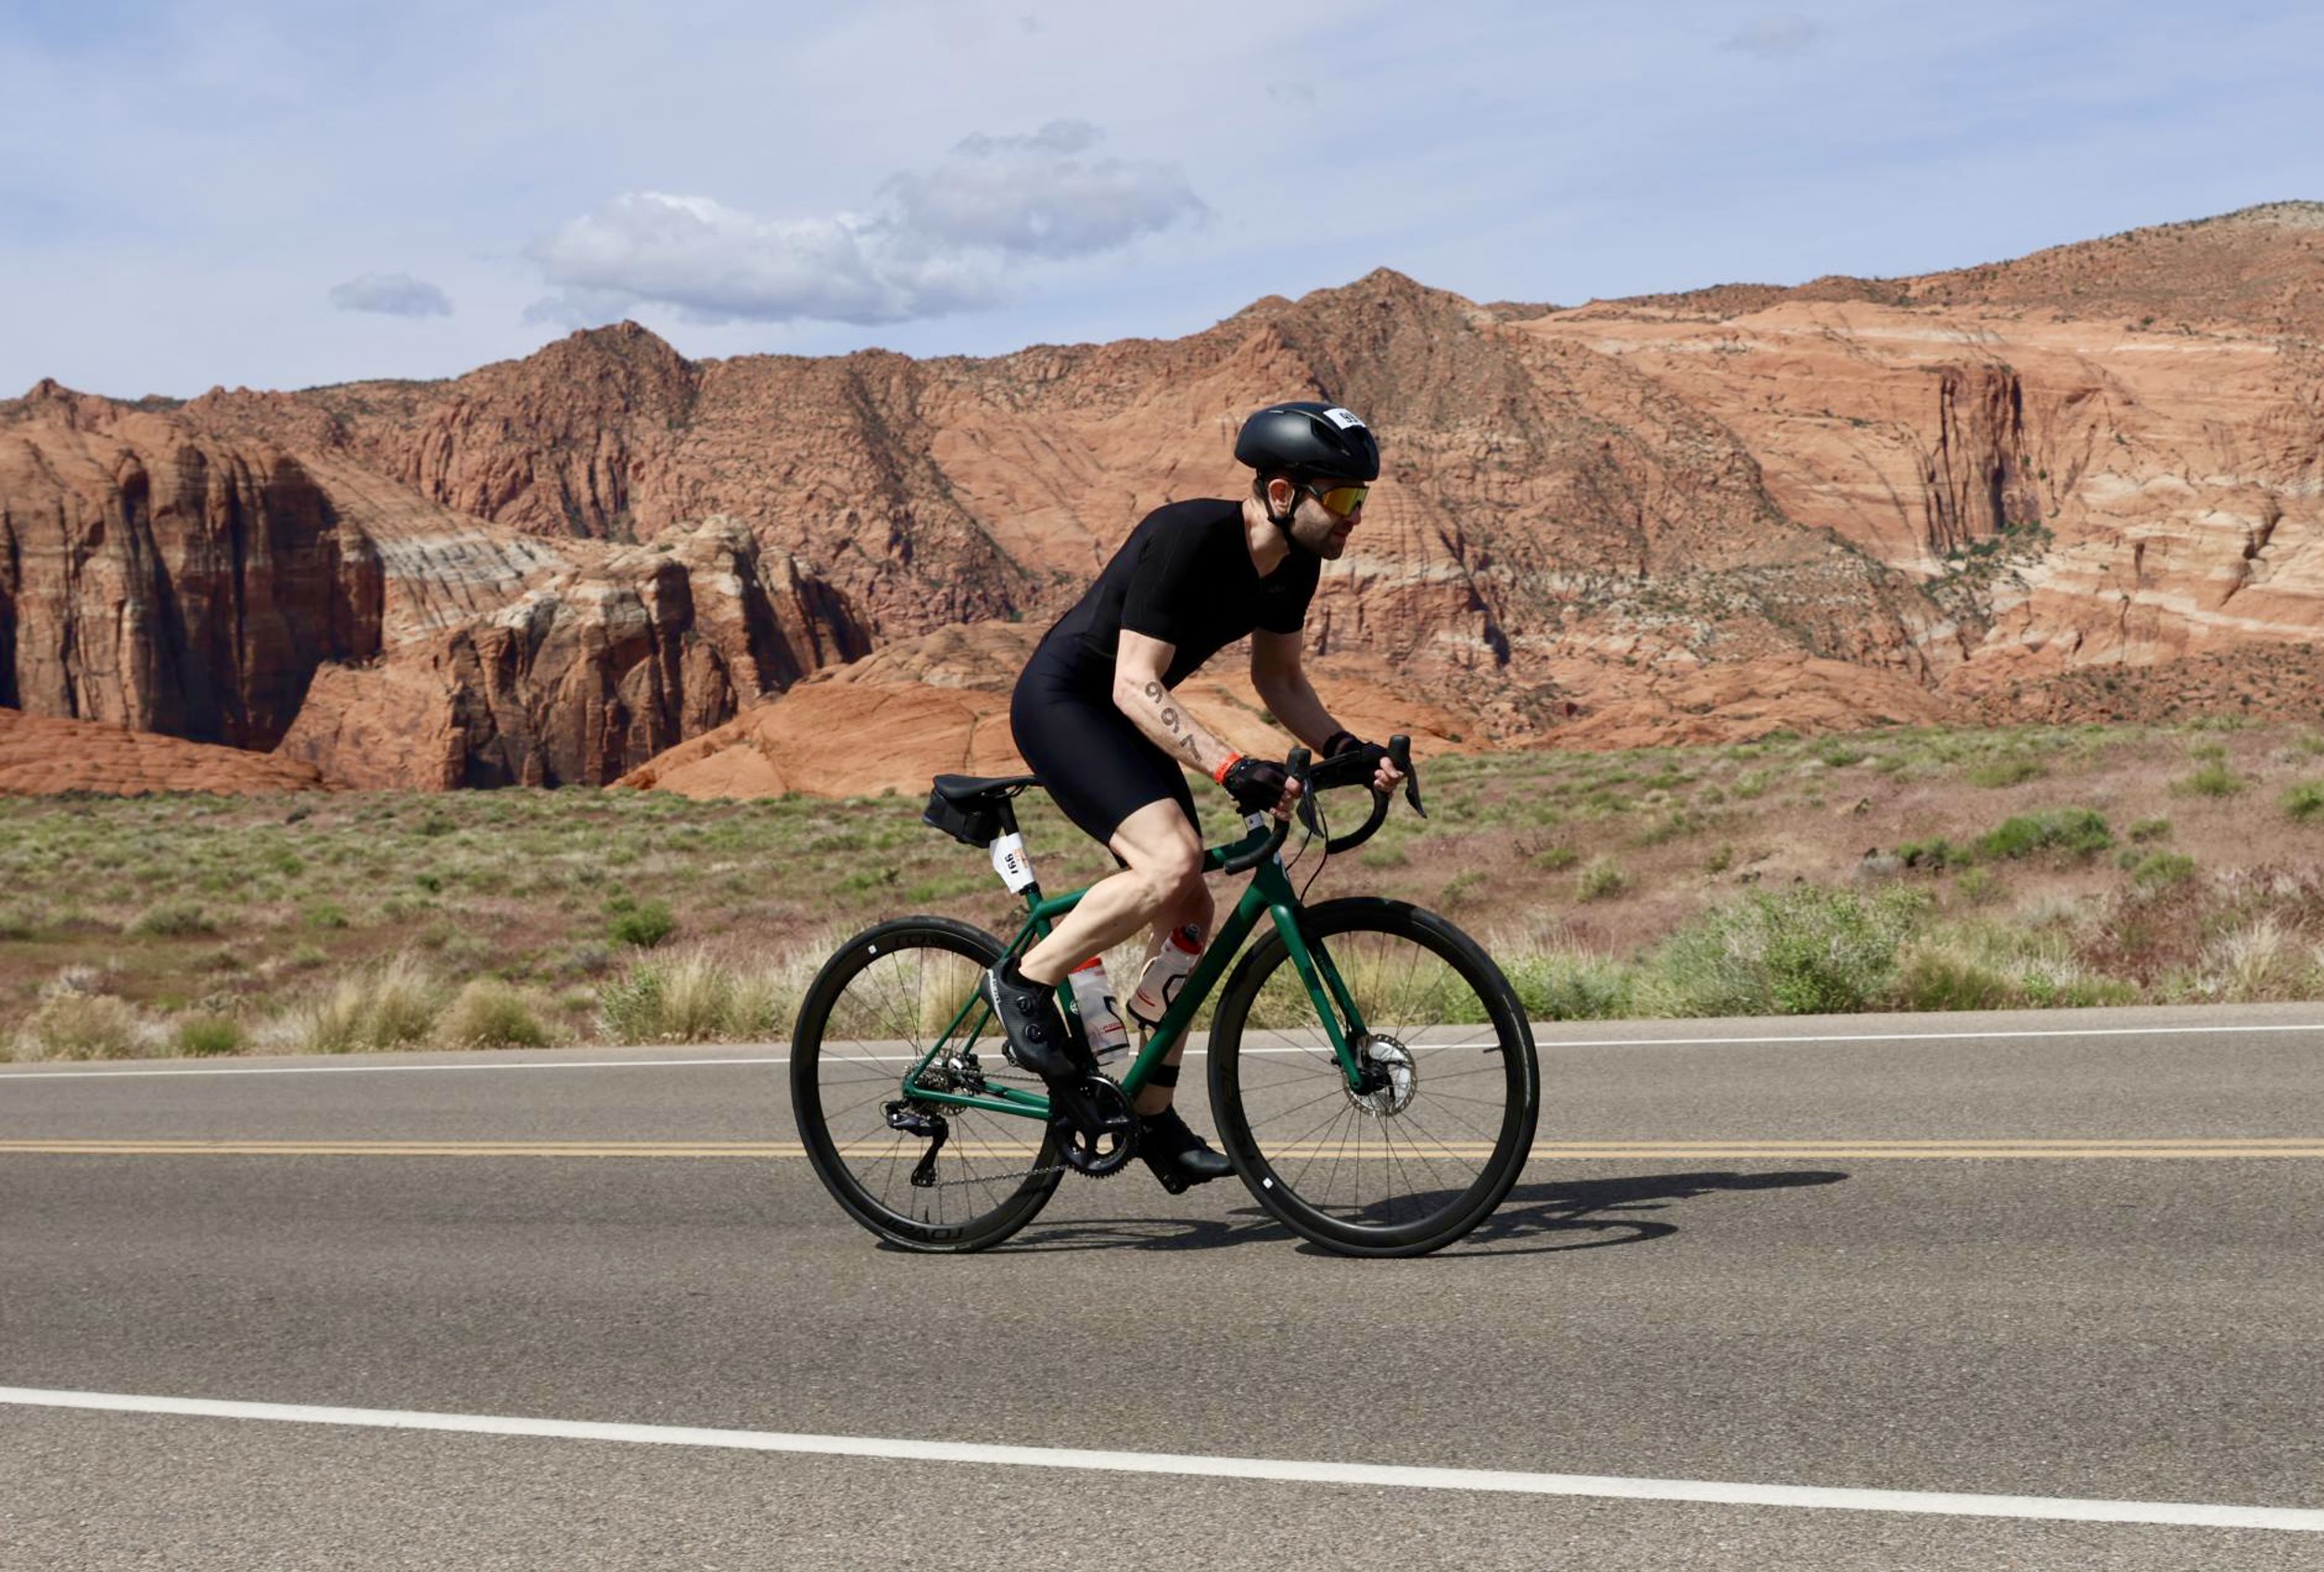 Me, climbing off the saddle on a green Specialized Aethos bike, through Snow Canyon, with its red cliffs visible in the background. I'm wearing a black helmet, black trisuit, black gloves, black shoes, and gold sunglasses. I have a race tattoo in my right arm with the number 997.